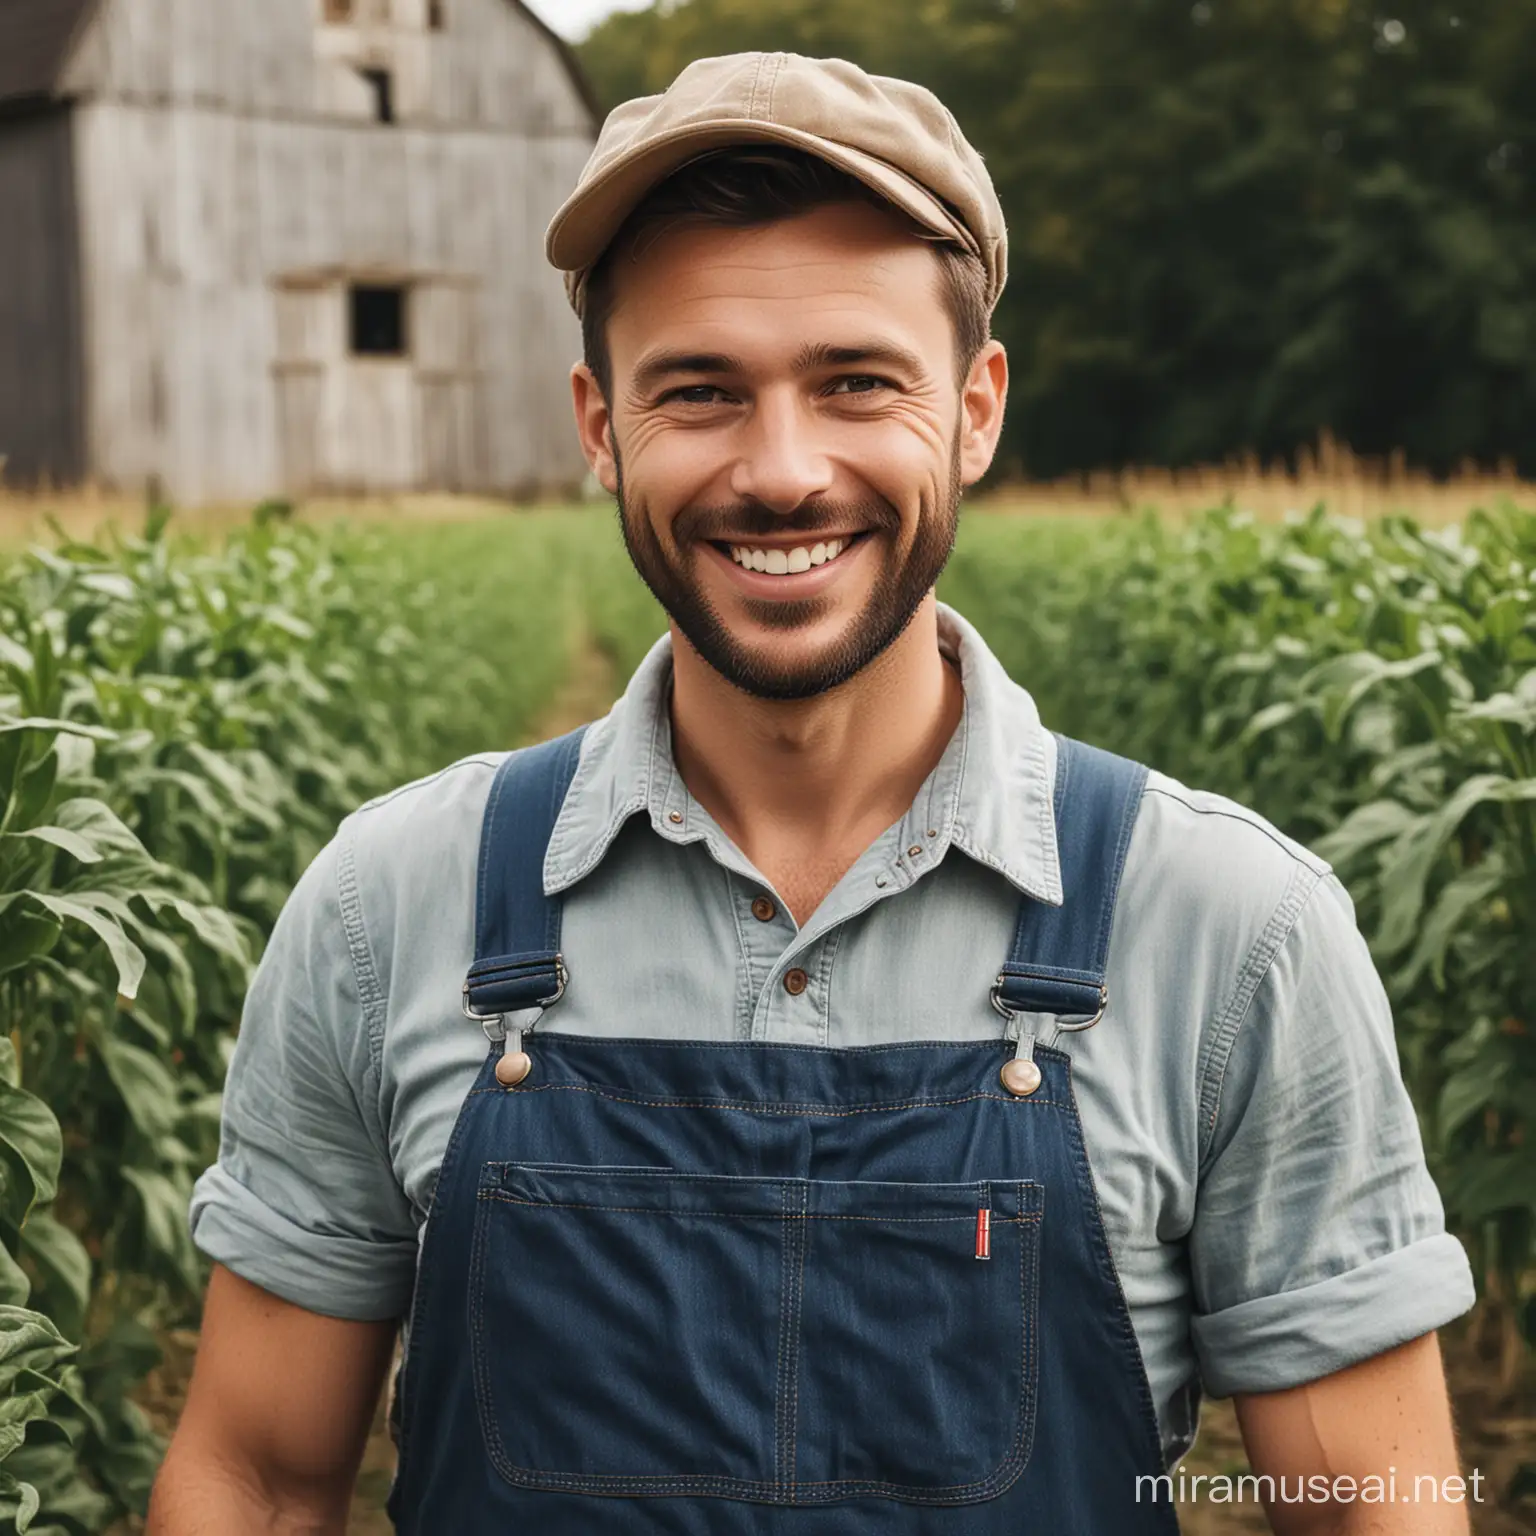 Cheerful Farmer in Traditional Overalls Harvesting Crops